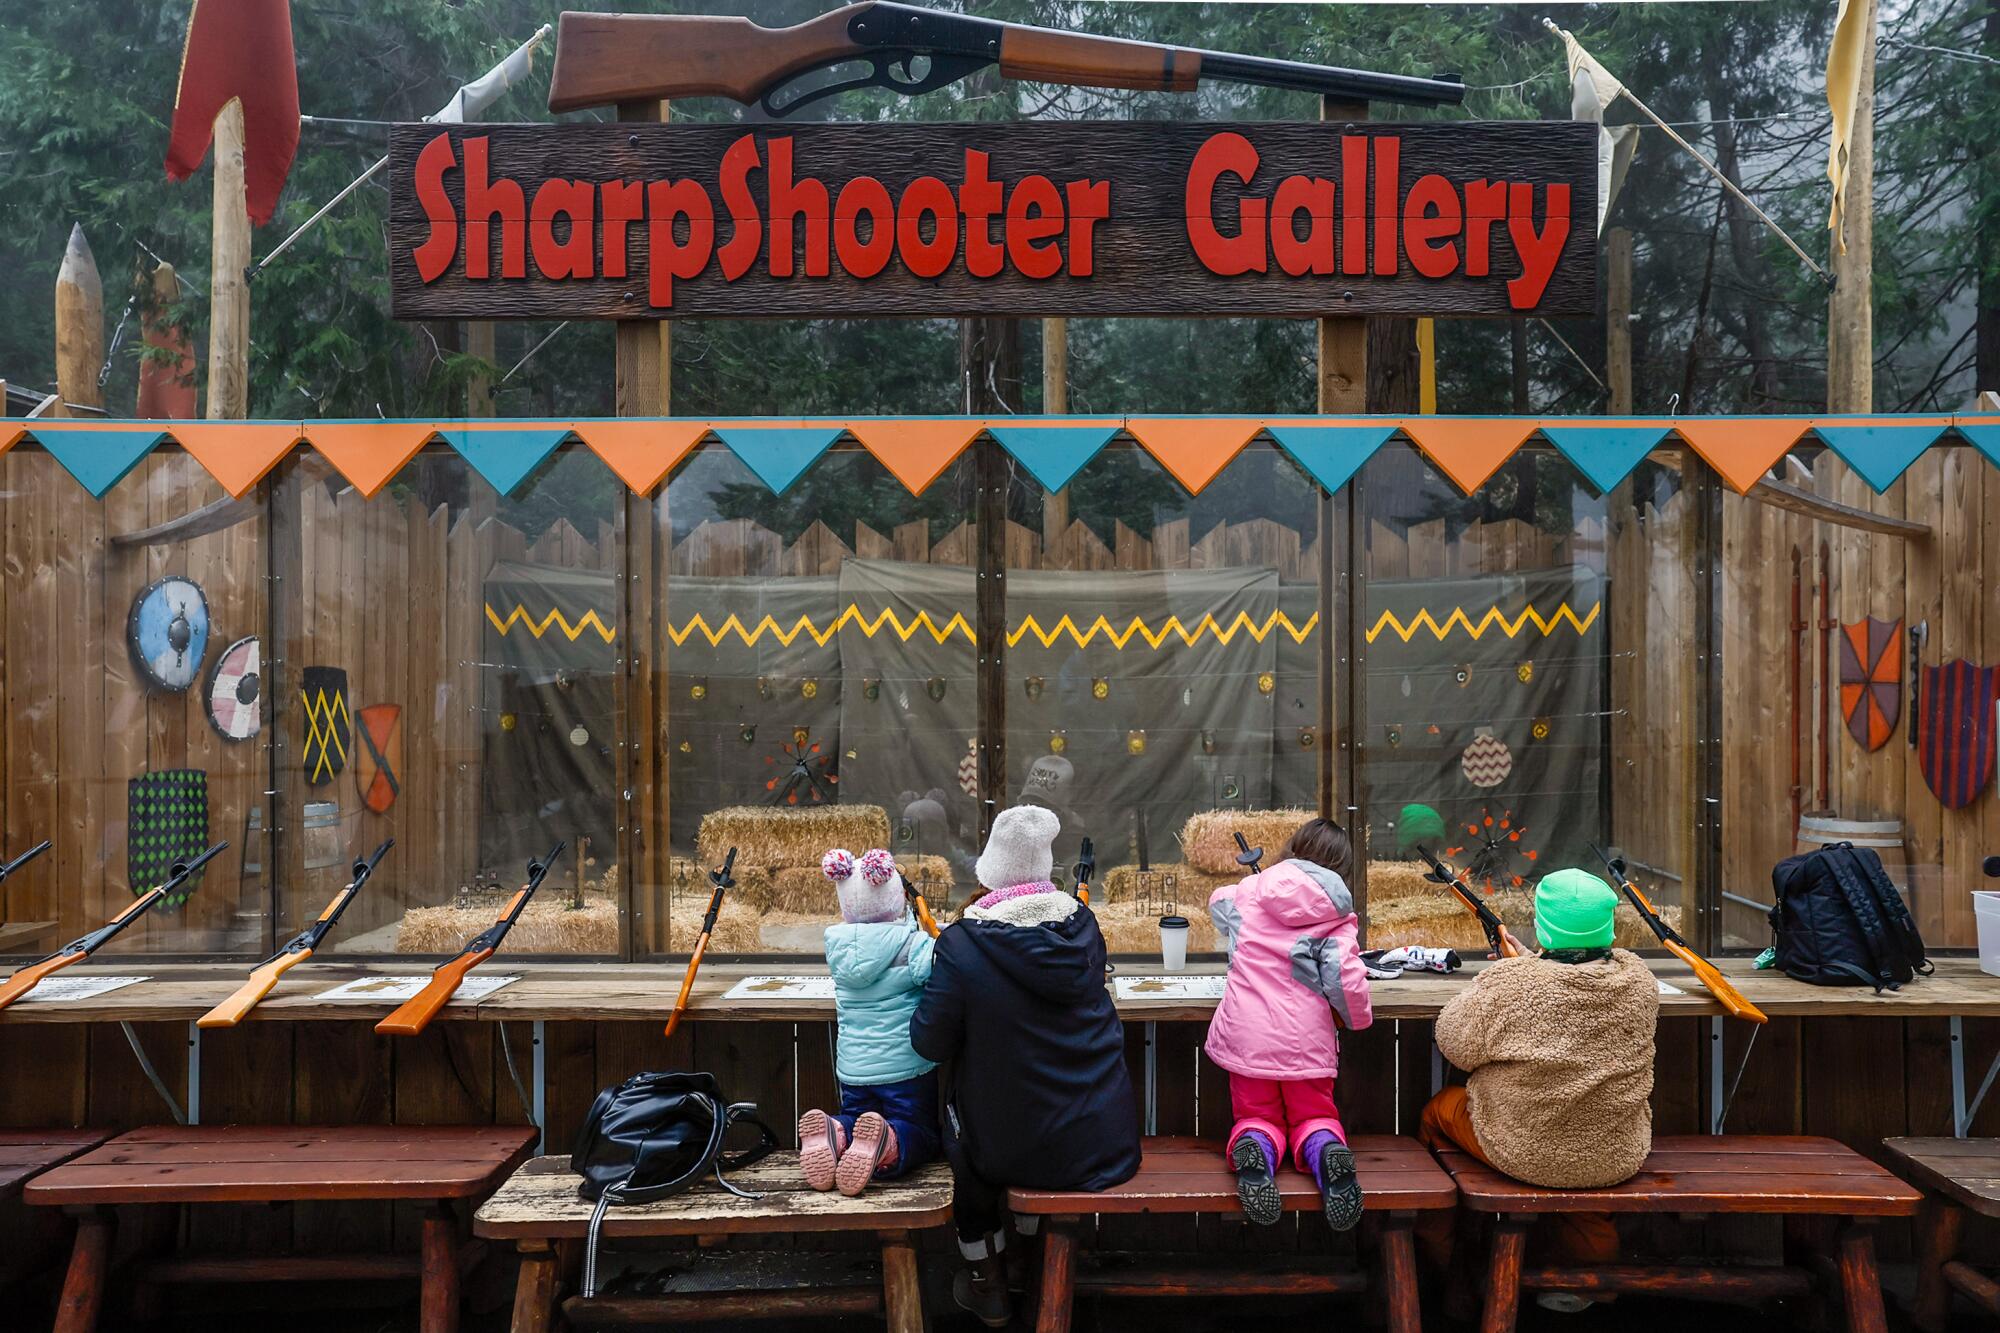 Four children with their backs to the camera, at a play shooting range with a sign above them reading "Sharpshooter Gallery"